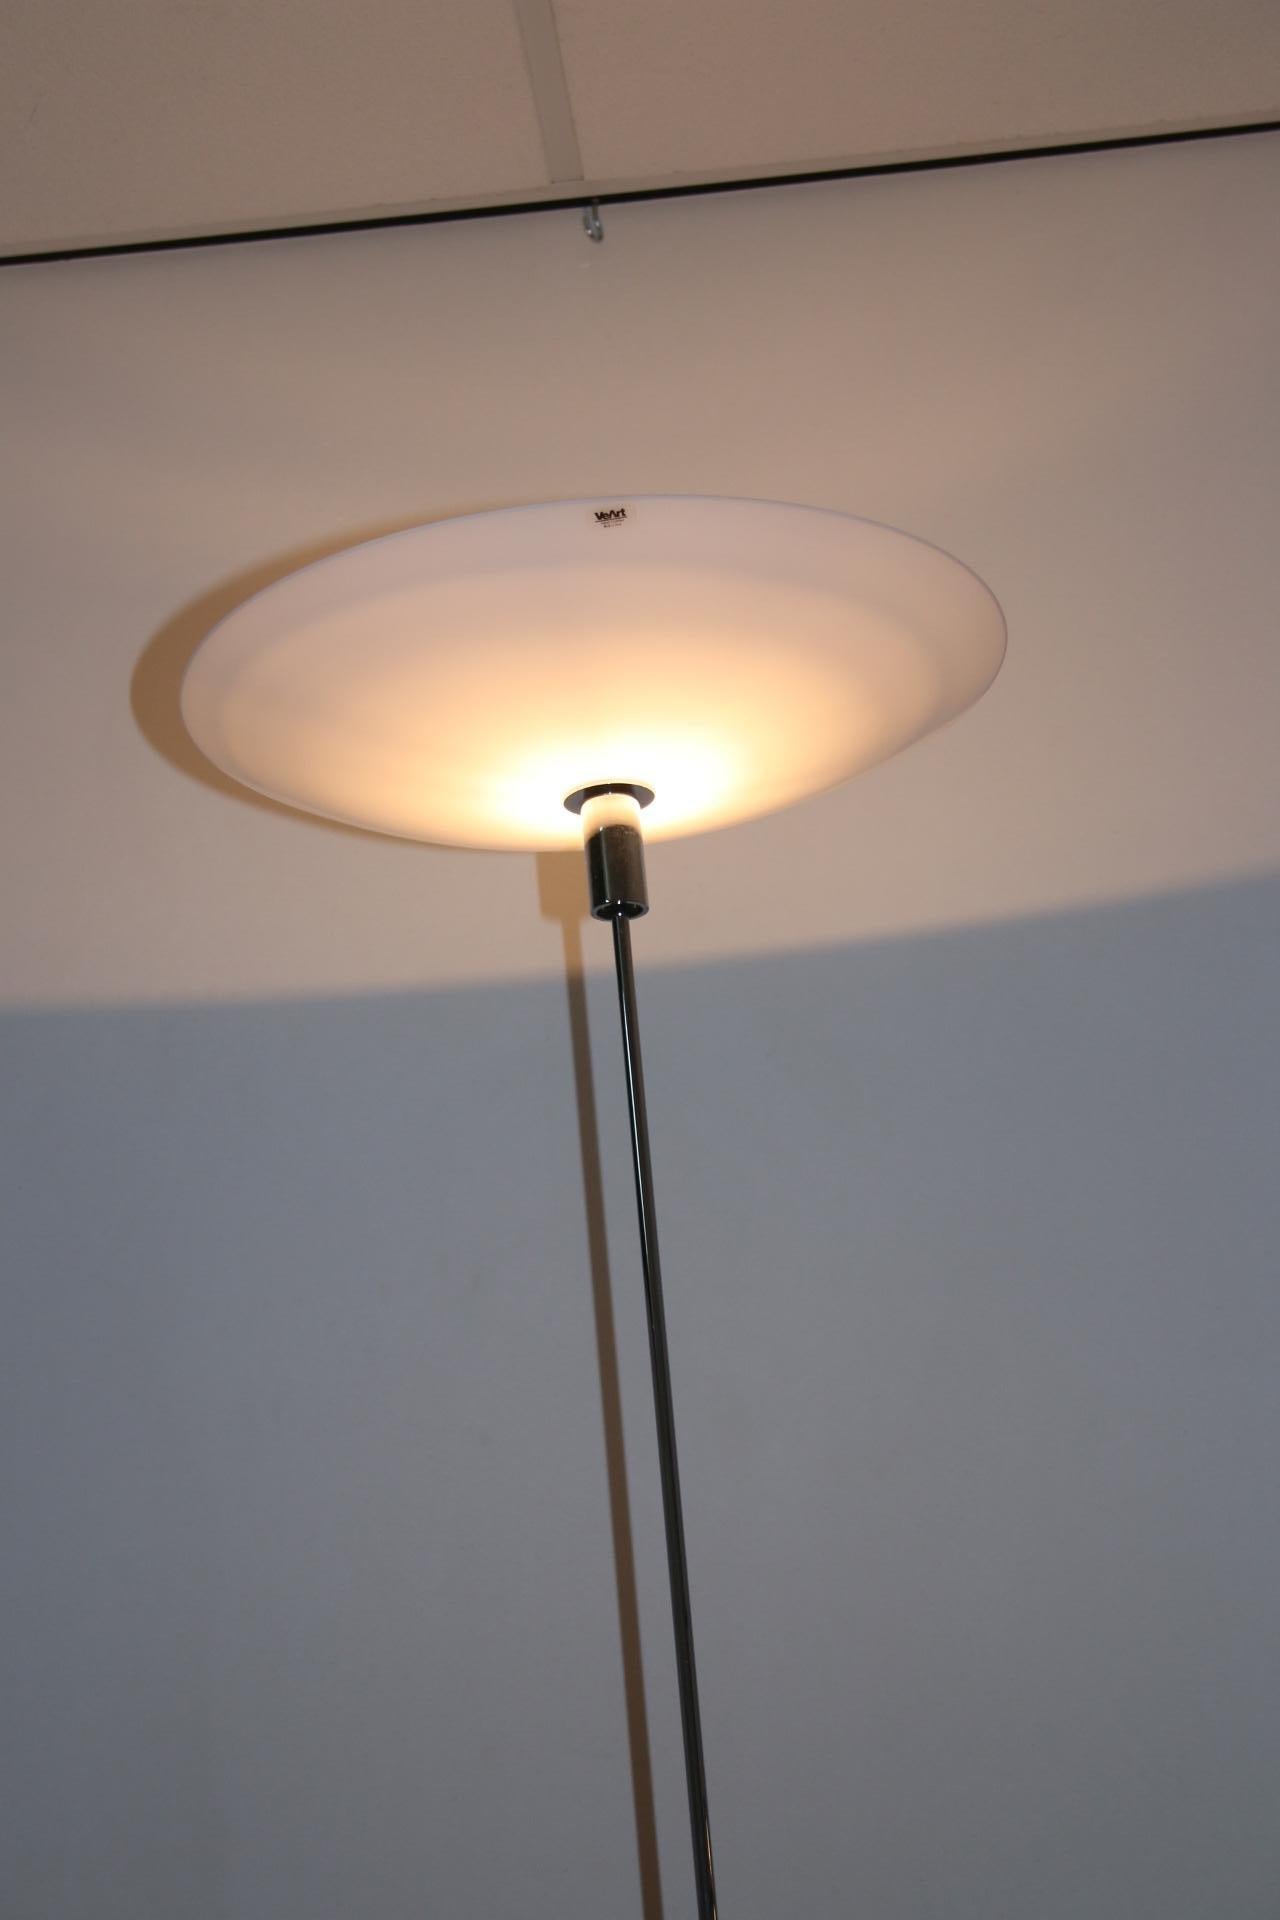 VeArt Italy Artemide Floor Lamp Design by Jeannot Cerutti For Sale 1